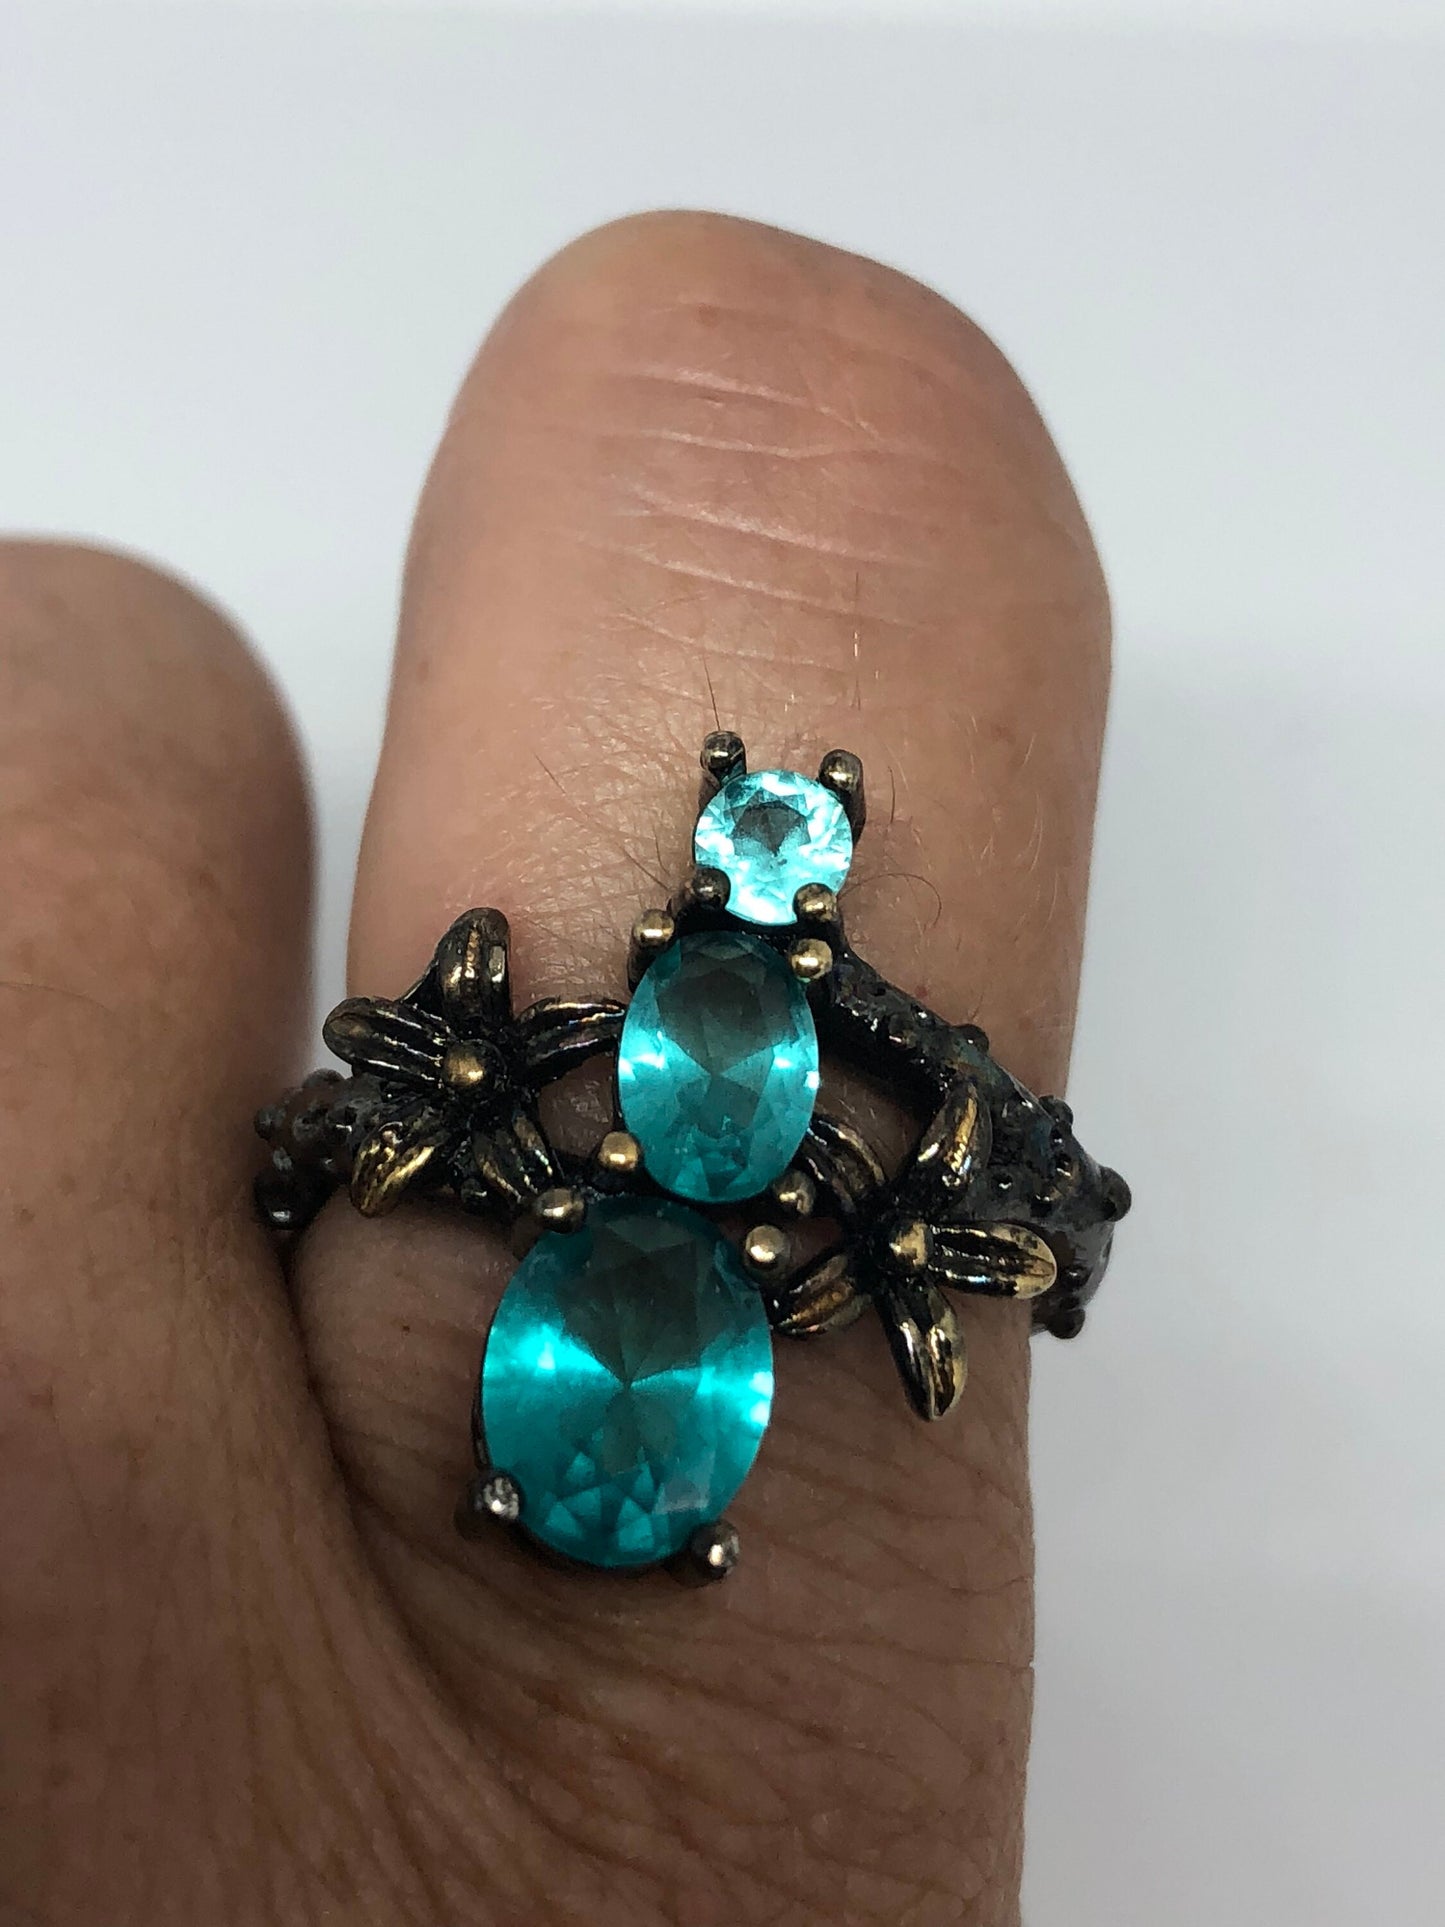 Vintage Handmade Deep Blue Aqua Crystal Setting 925 Sterling Silver and Bronze Gothic Ring